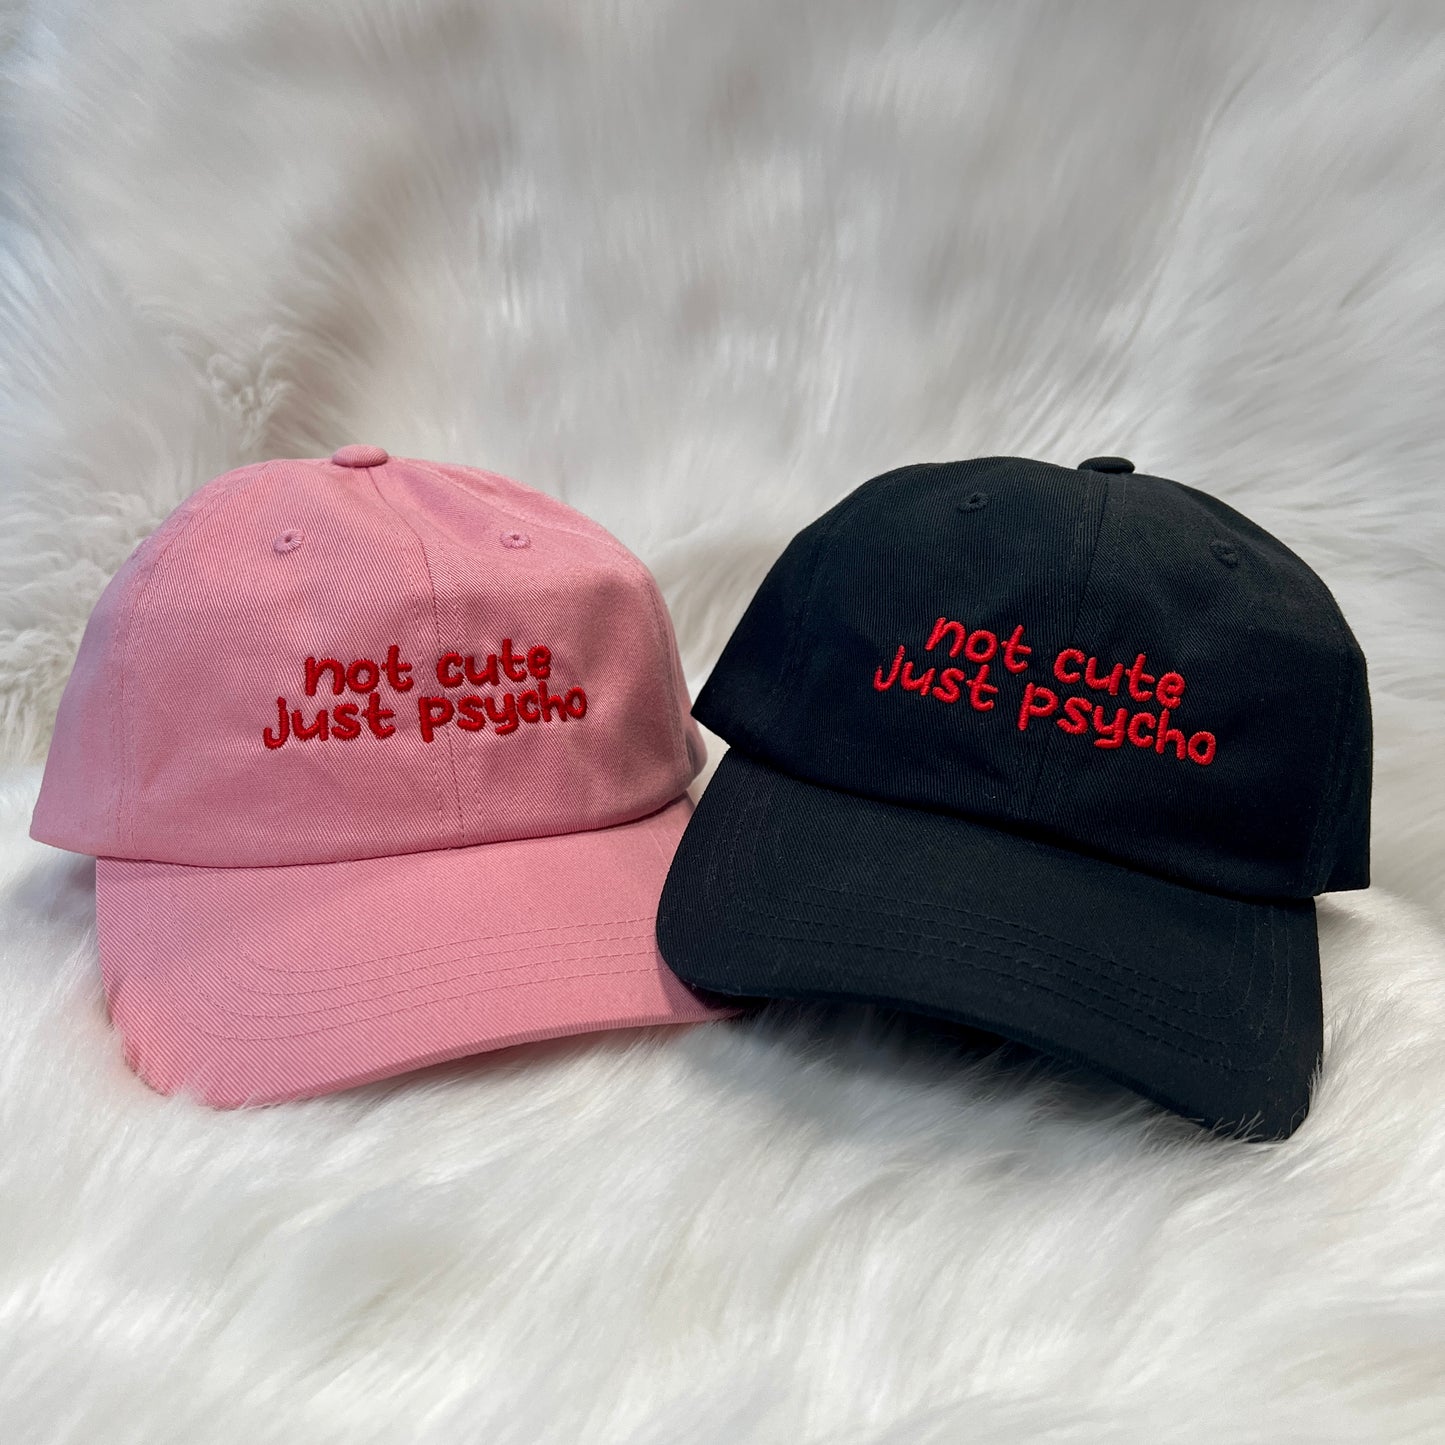 Not Cute, Just Psycho - Dad Hat